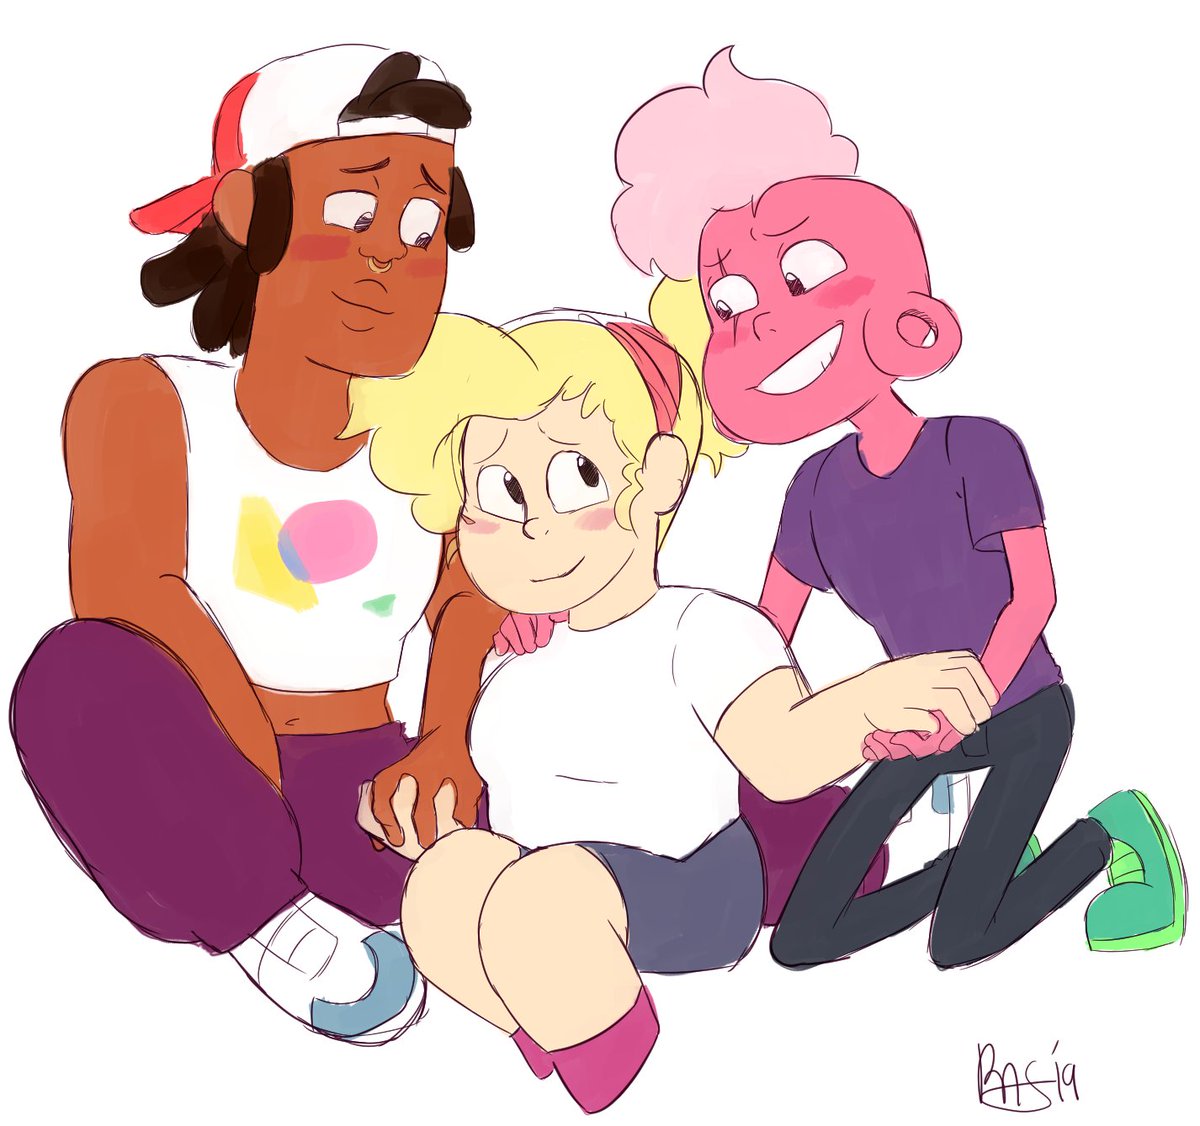 Final drawing of the decade is anything that involves Lars being treated with the love everyone else be gettin'

have a good new year everyone! <3

#StevenUniverseFuture 